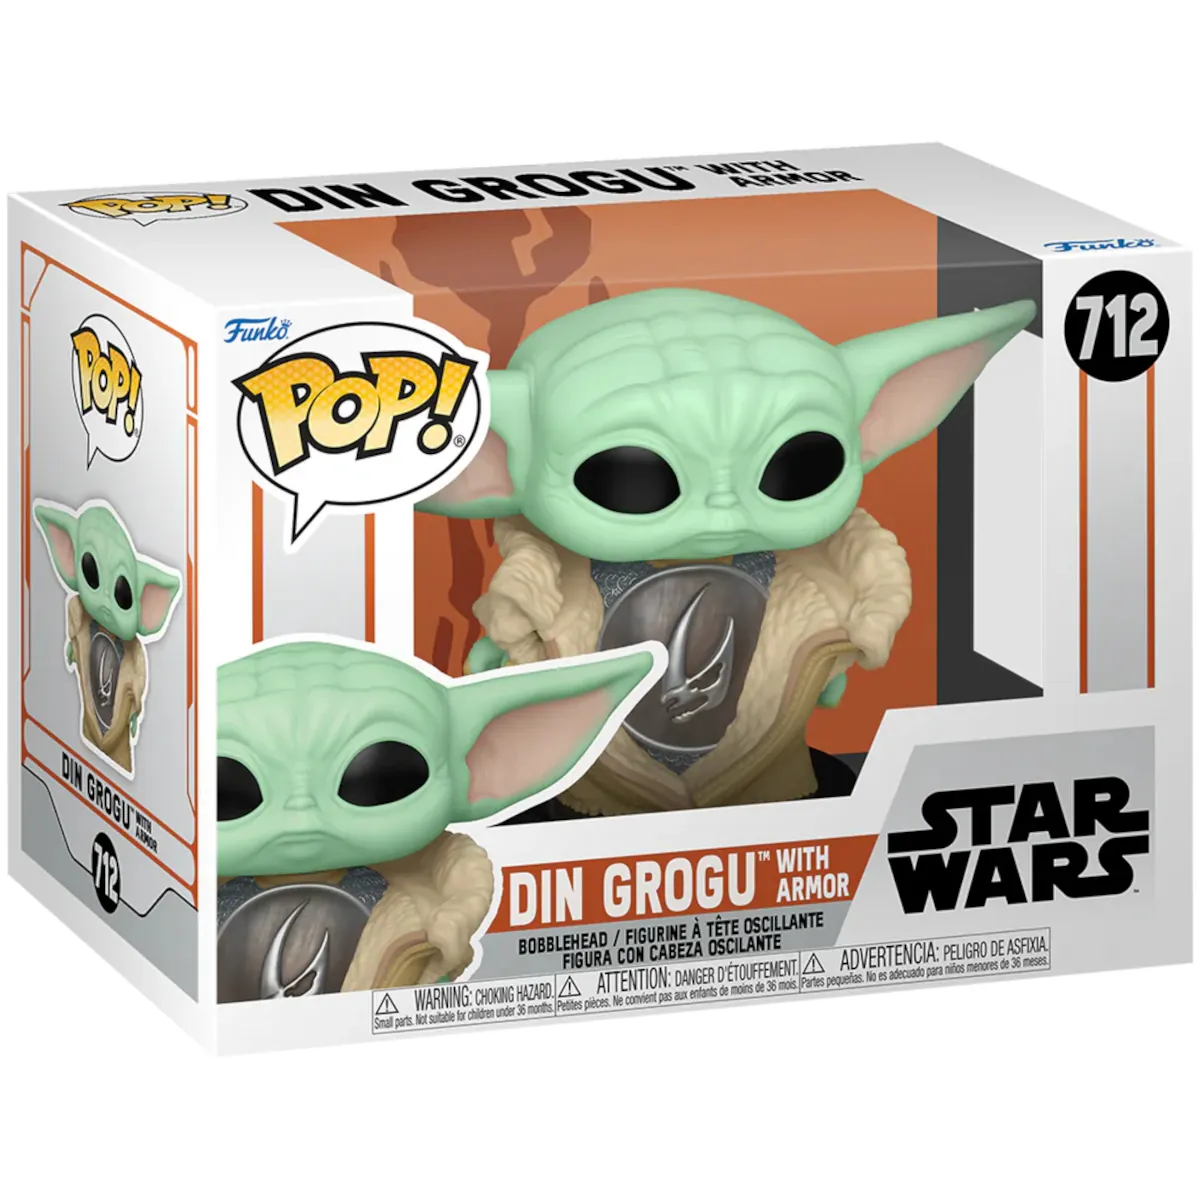 80004 Funko Pop! Television - Star Wars The Mandalorian - Din Grogu with Armor Collectable Vinyl Figure Box Front